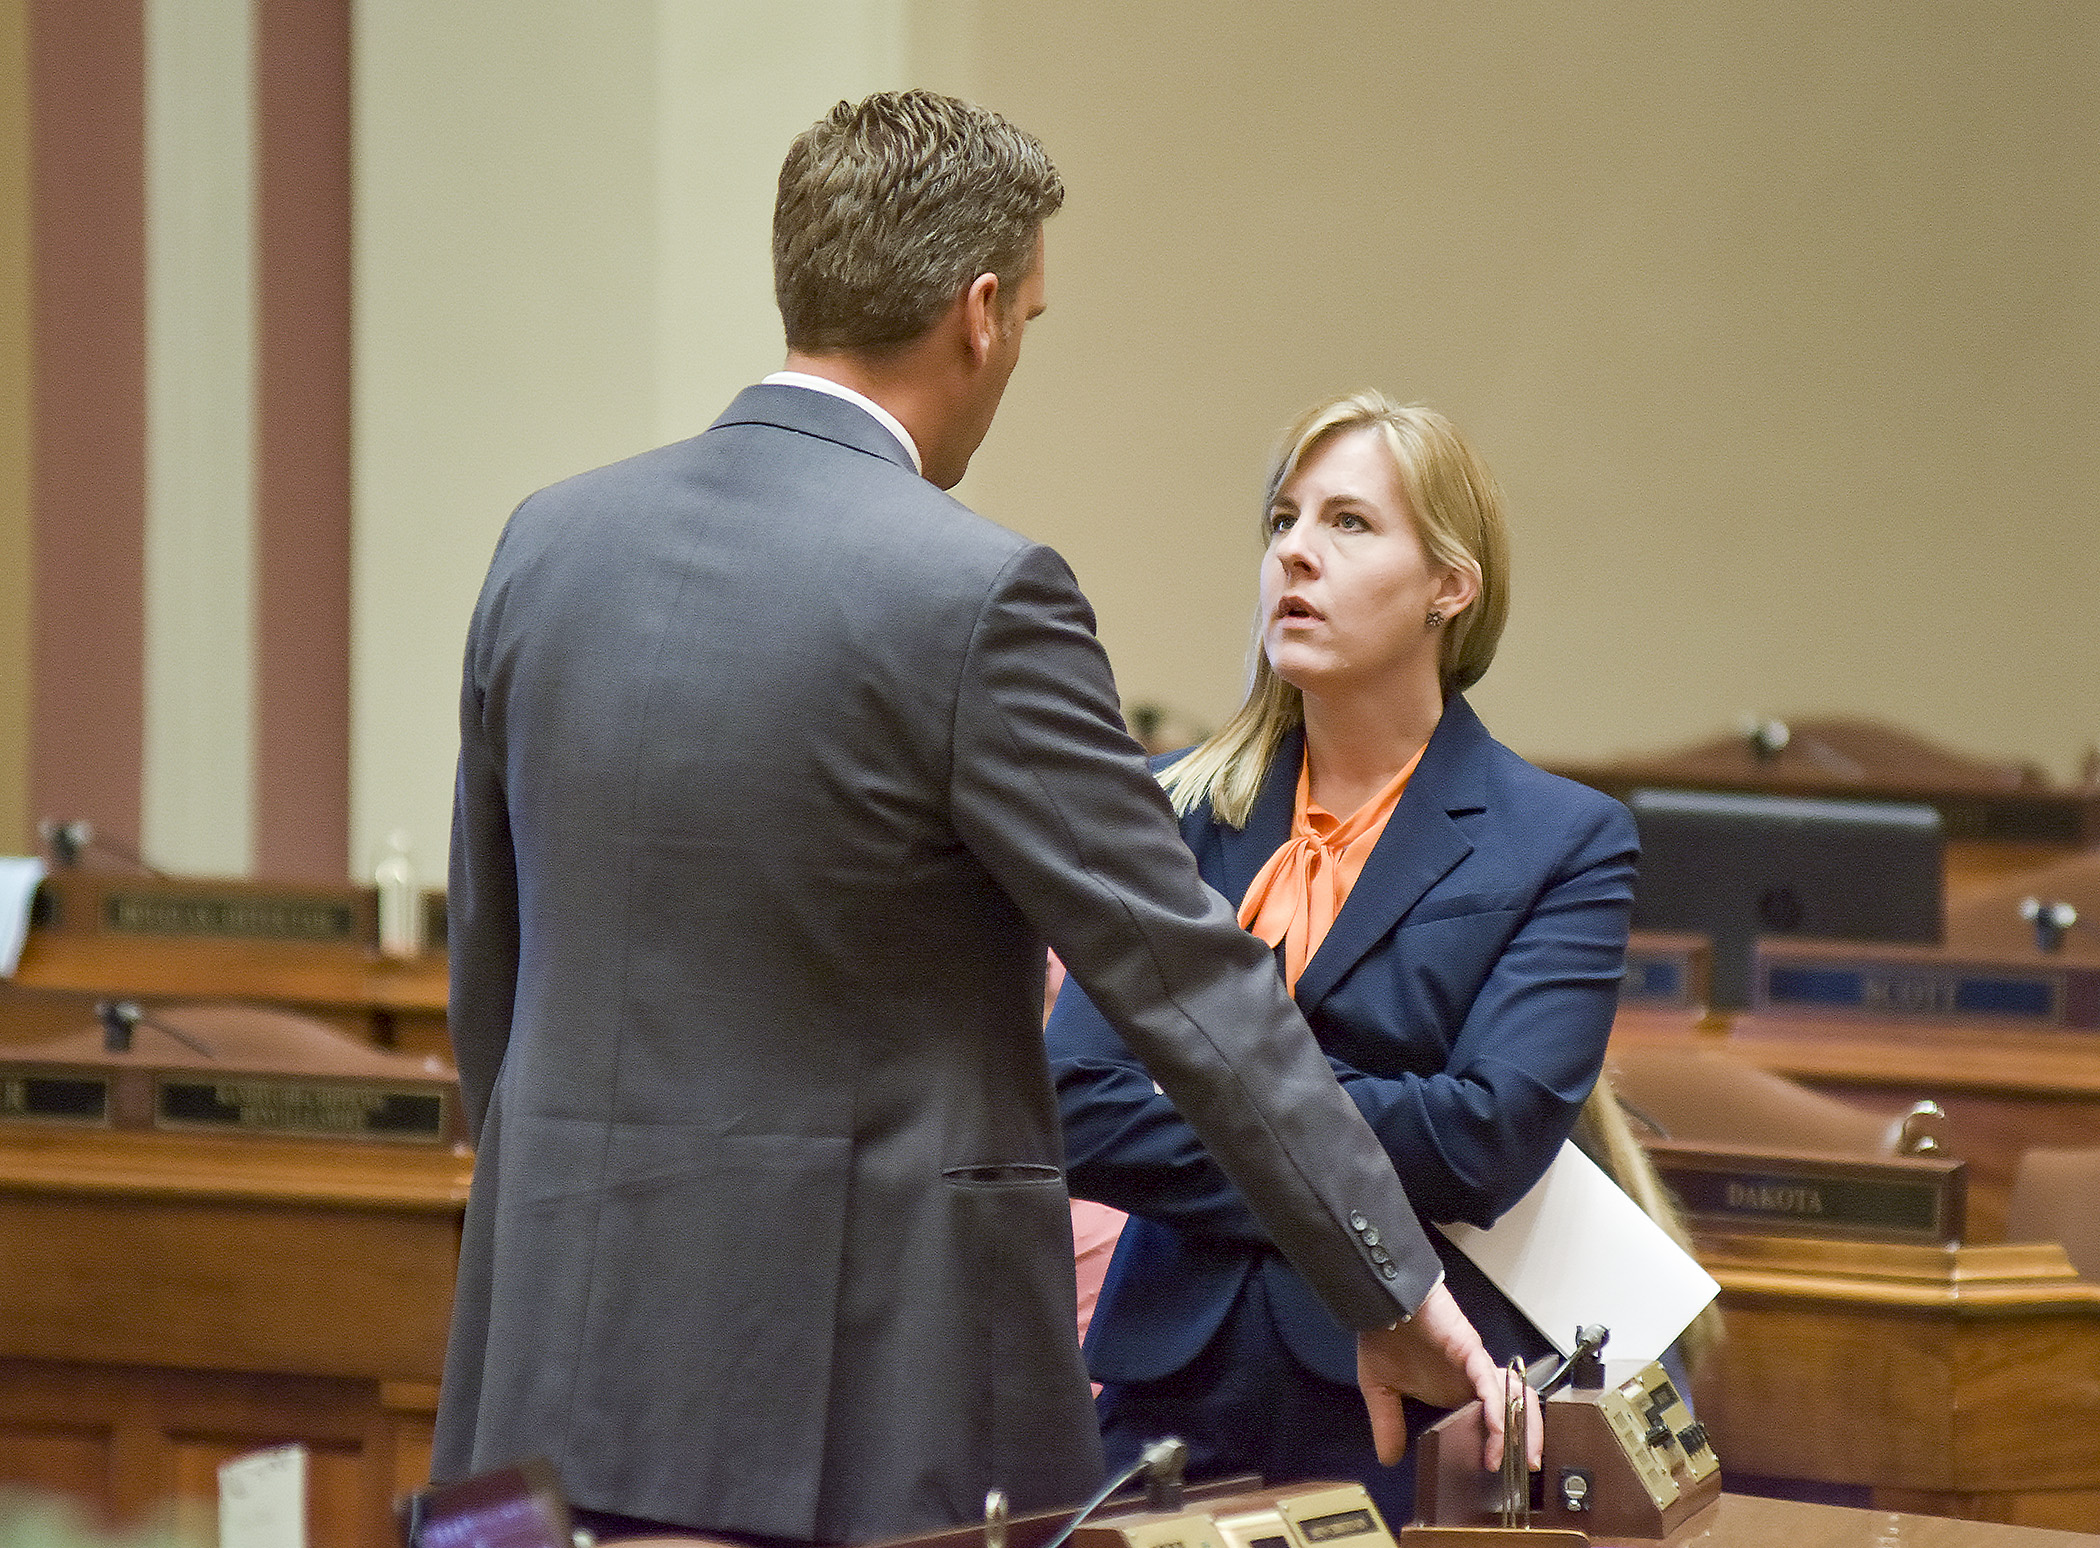 House Speaker Kurt Daudt and House Minority Leader Melissa Hortman confer on the House Floor during a recess early Thursday afternoon. Photo by Andrew VonBank